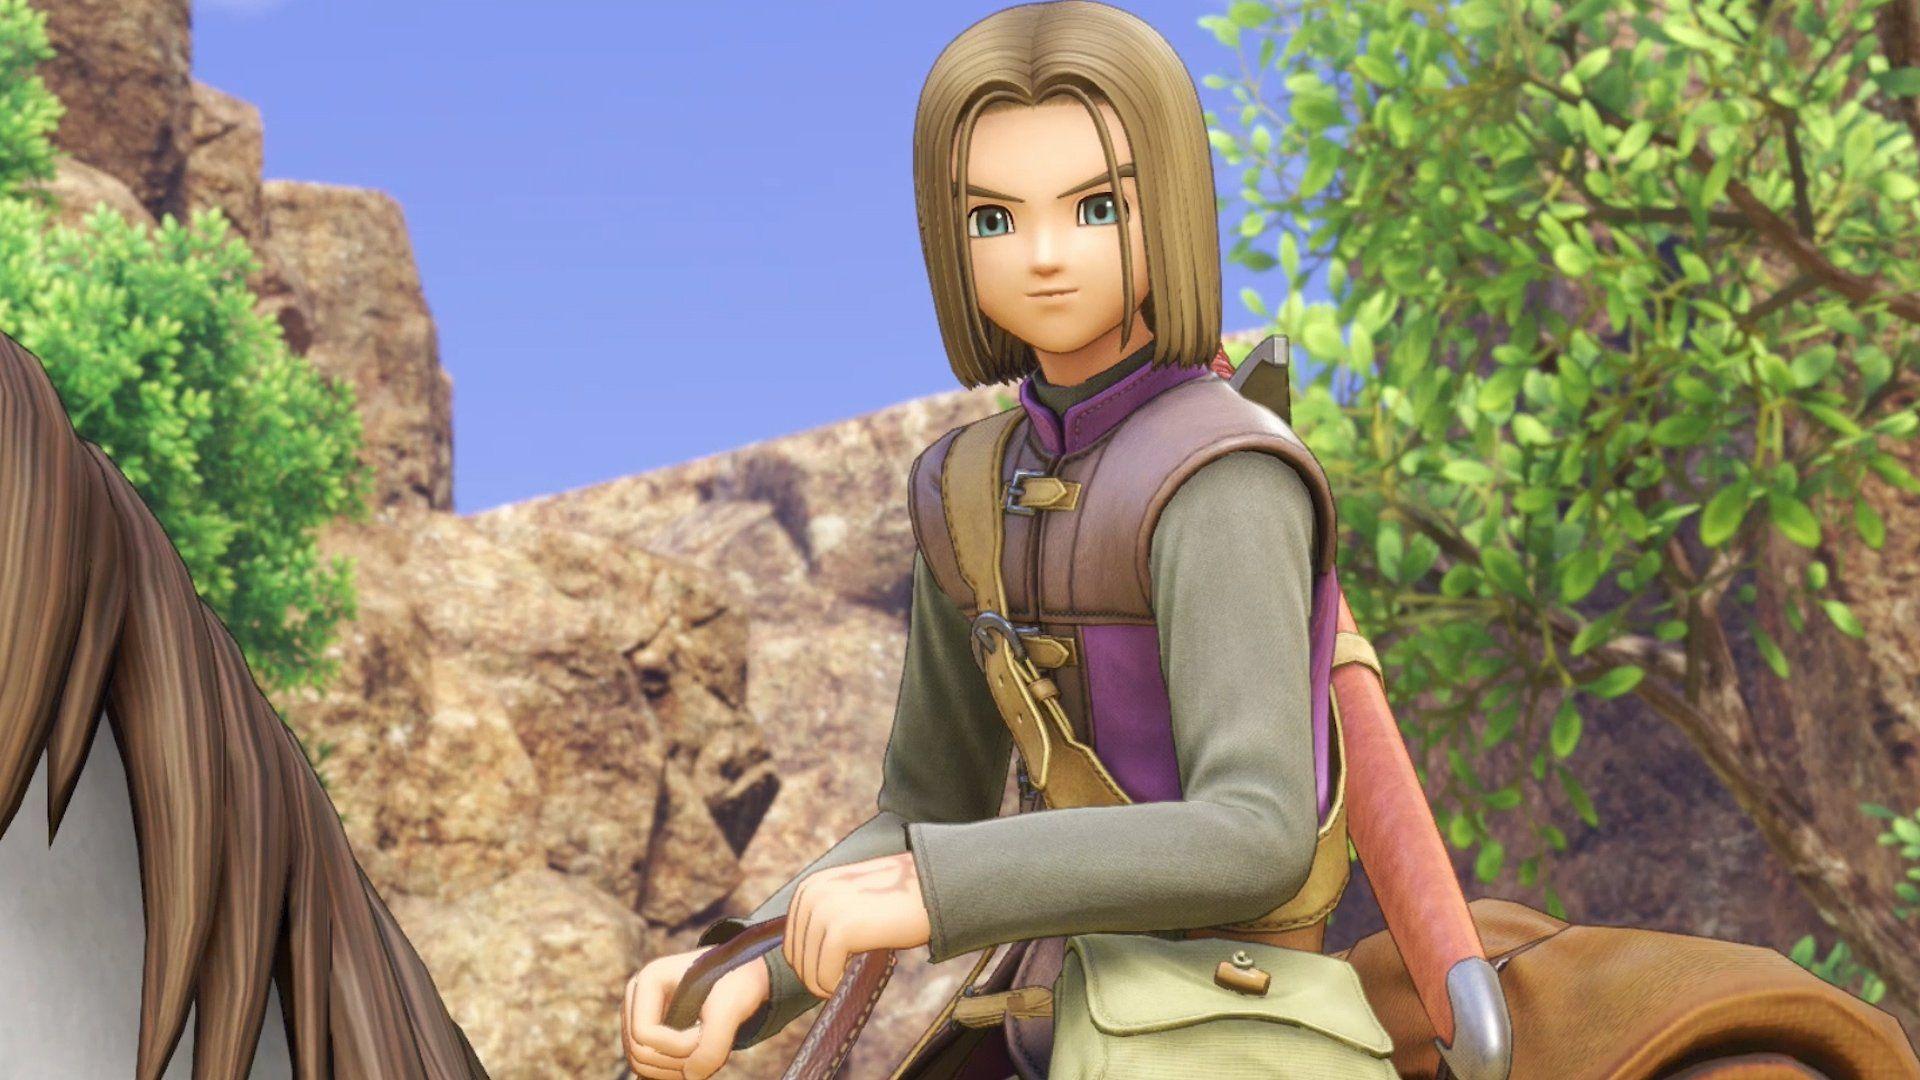 Minutes of Dragon Quest XI: Echoes of an Elusive Age Gameplay